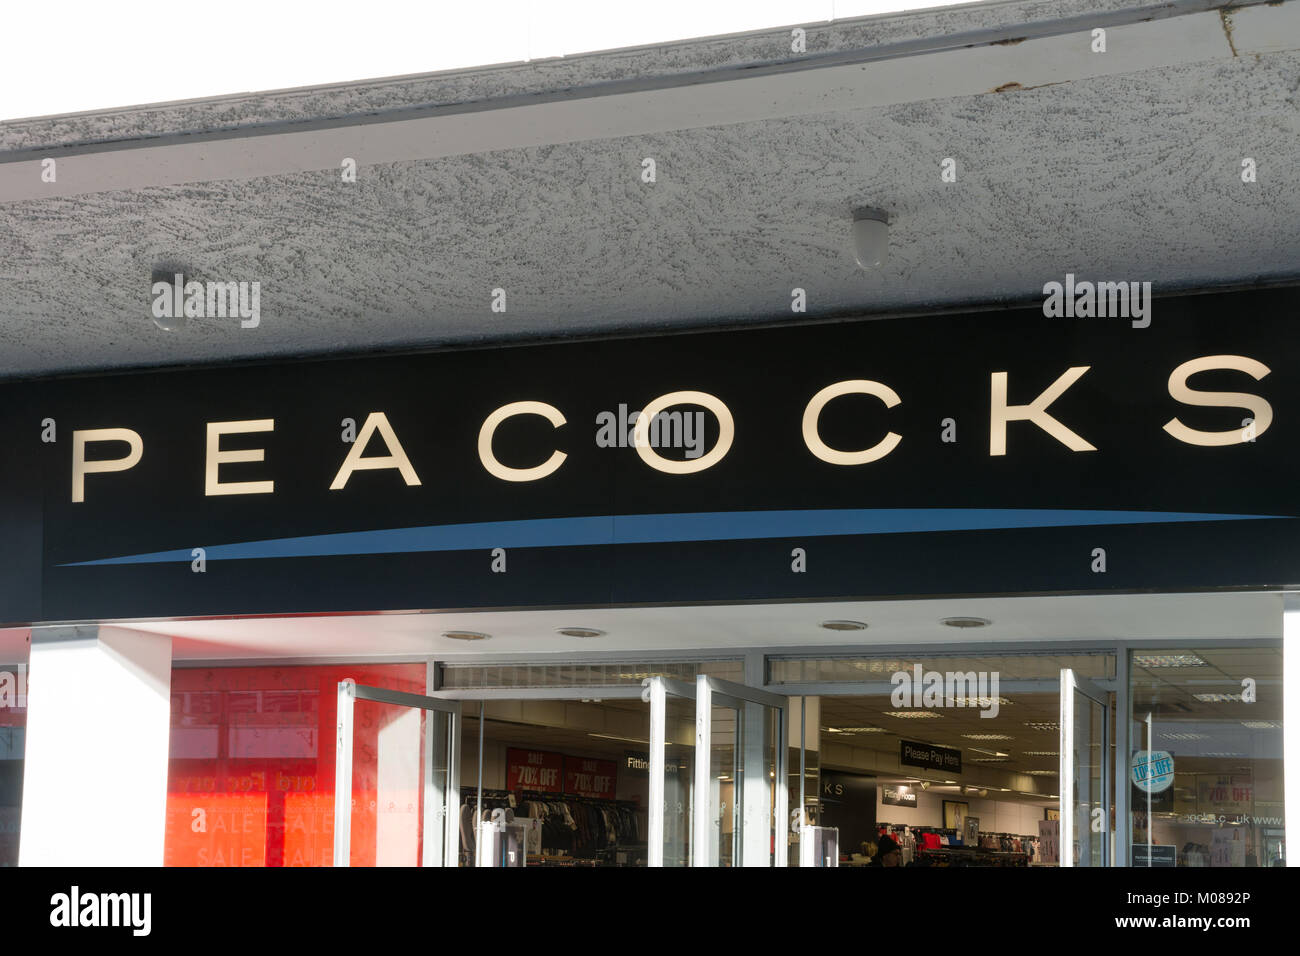 Peacocks discount fashion shop front and sign, UK Stock Photo